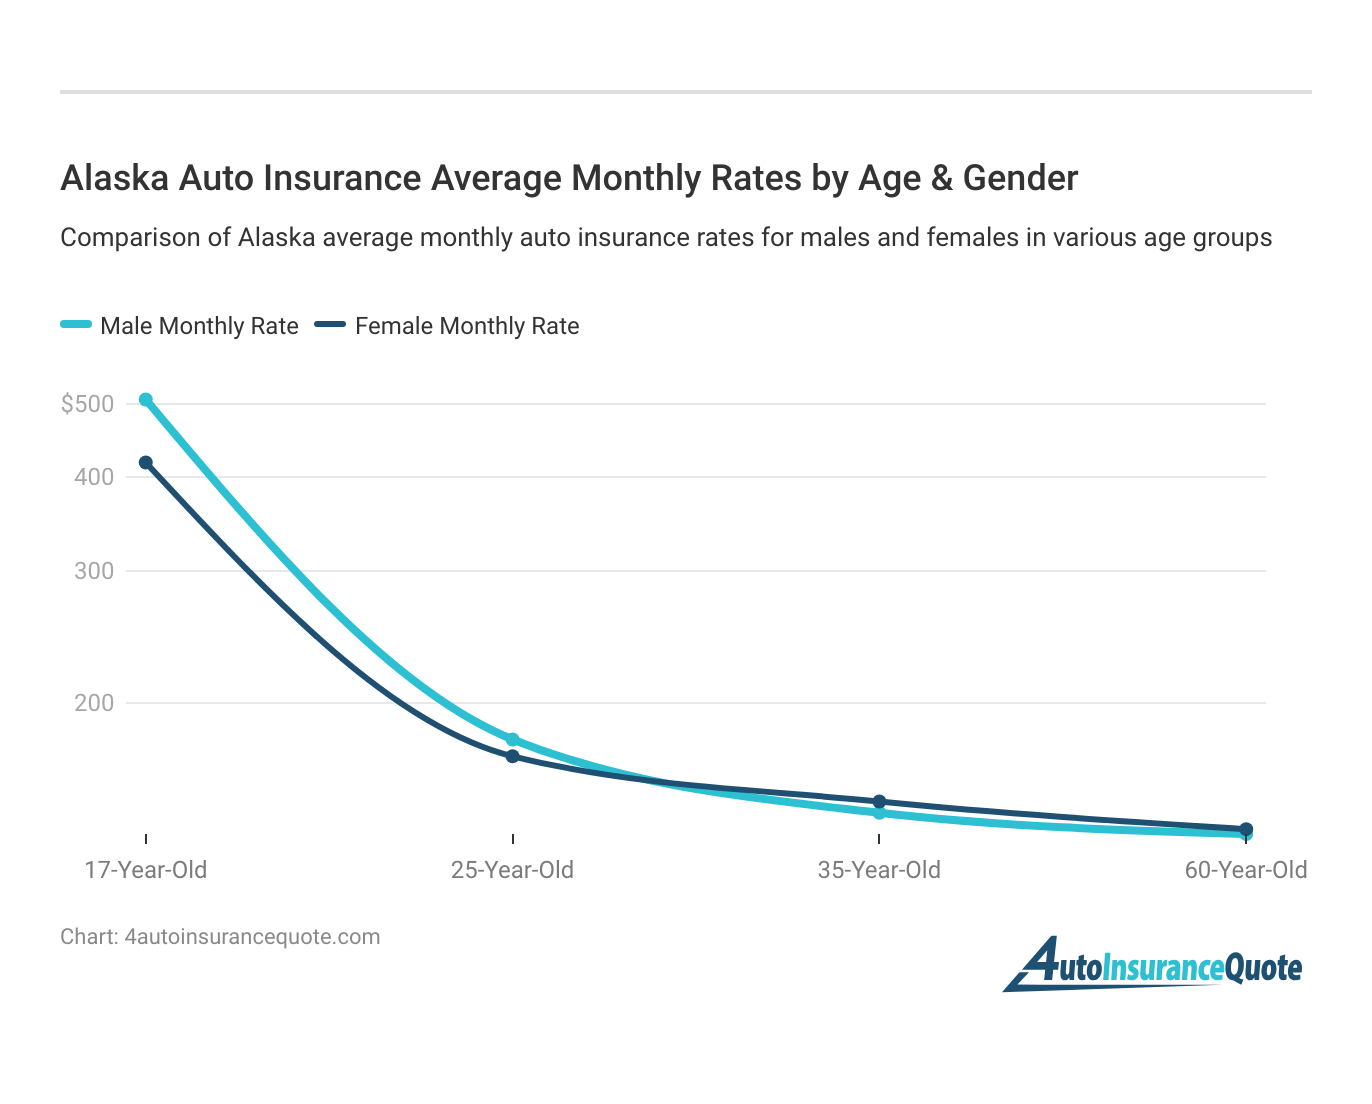 <h3>Alaska Auto Insurance Average Monthly Rates by Age & Gender</h3>